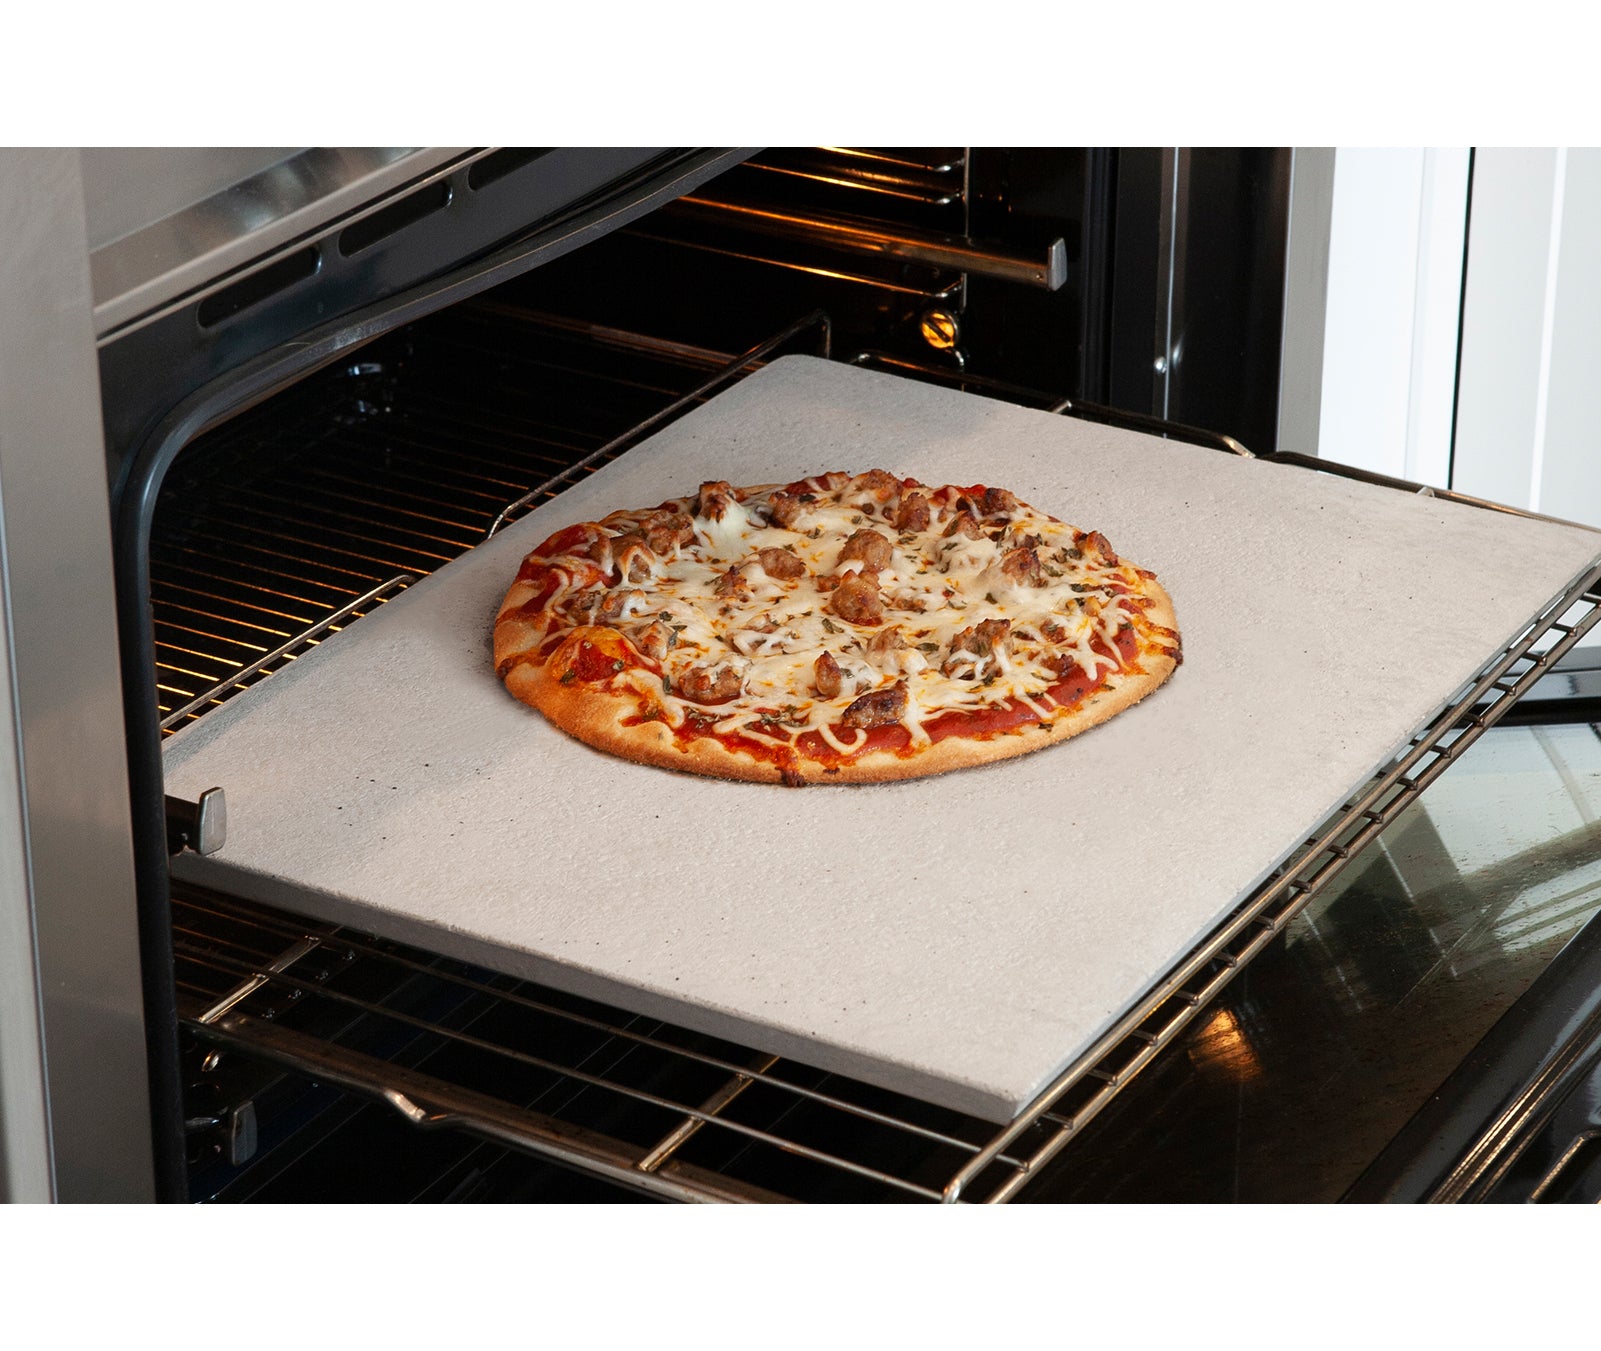 Home Oven Baking Stone 31 3/16" x 20 3/8"